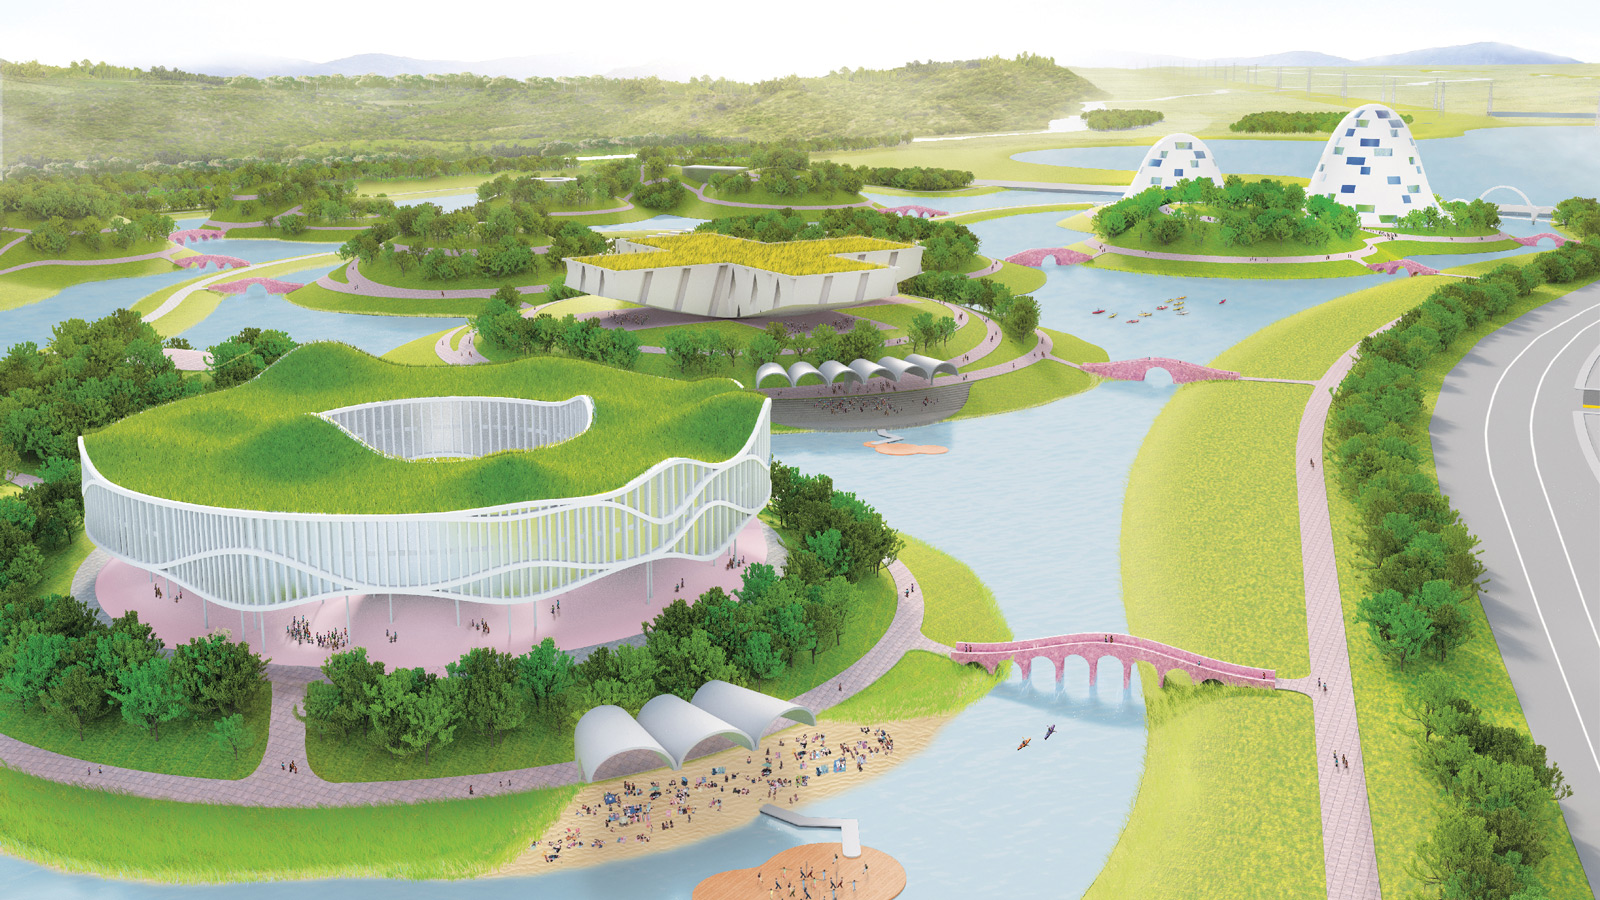 Combining Water Infrastructure with Architecture to Redesign Cities